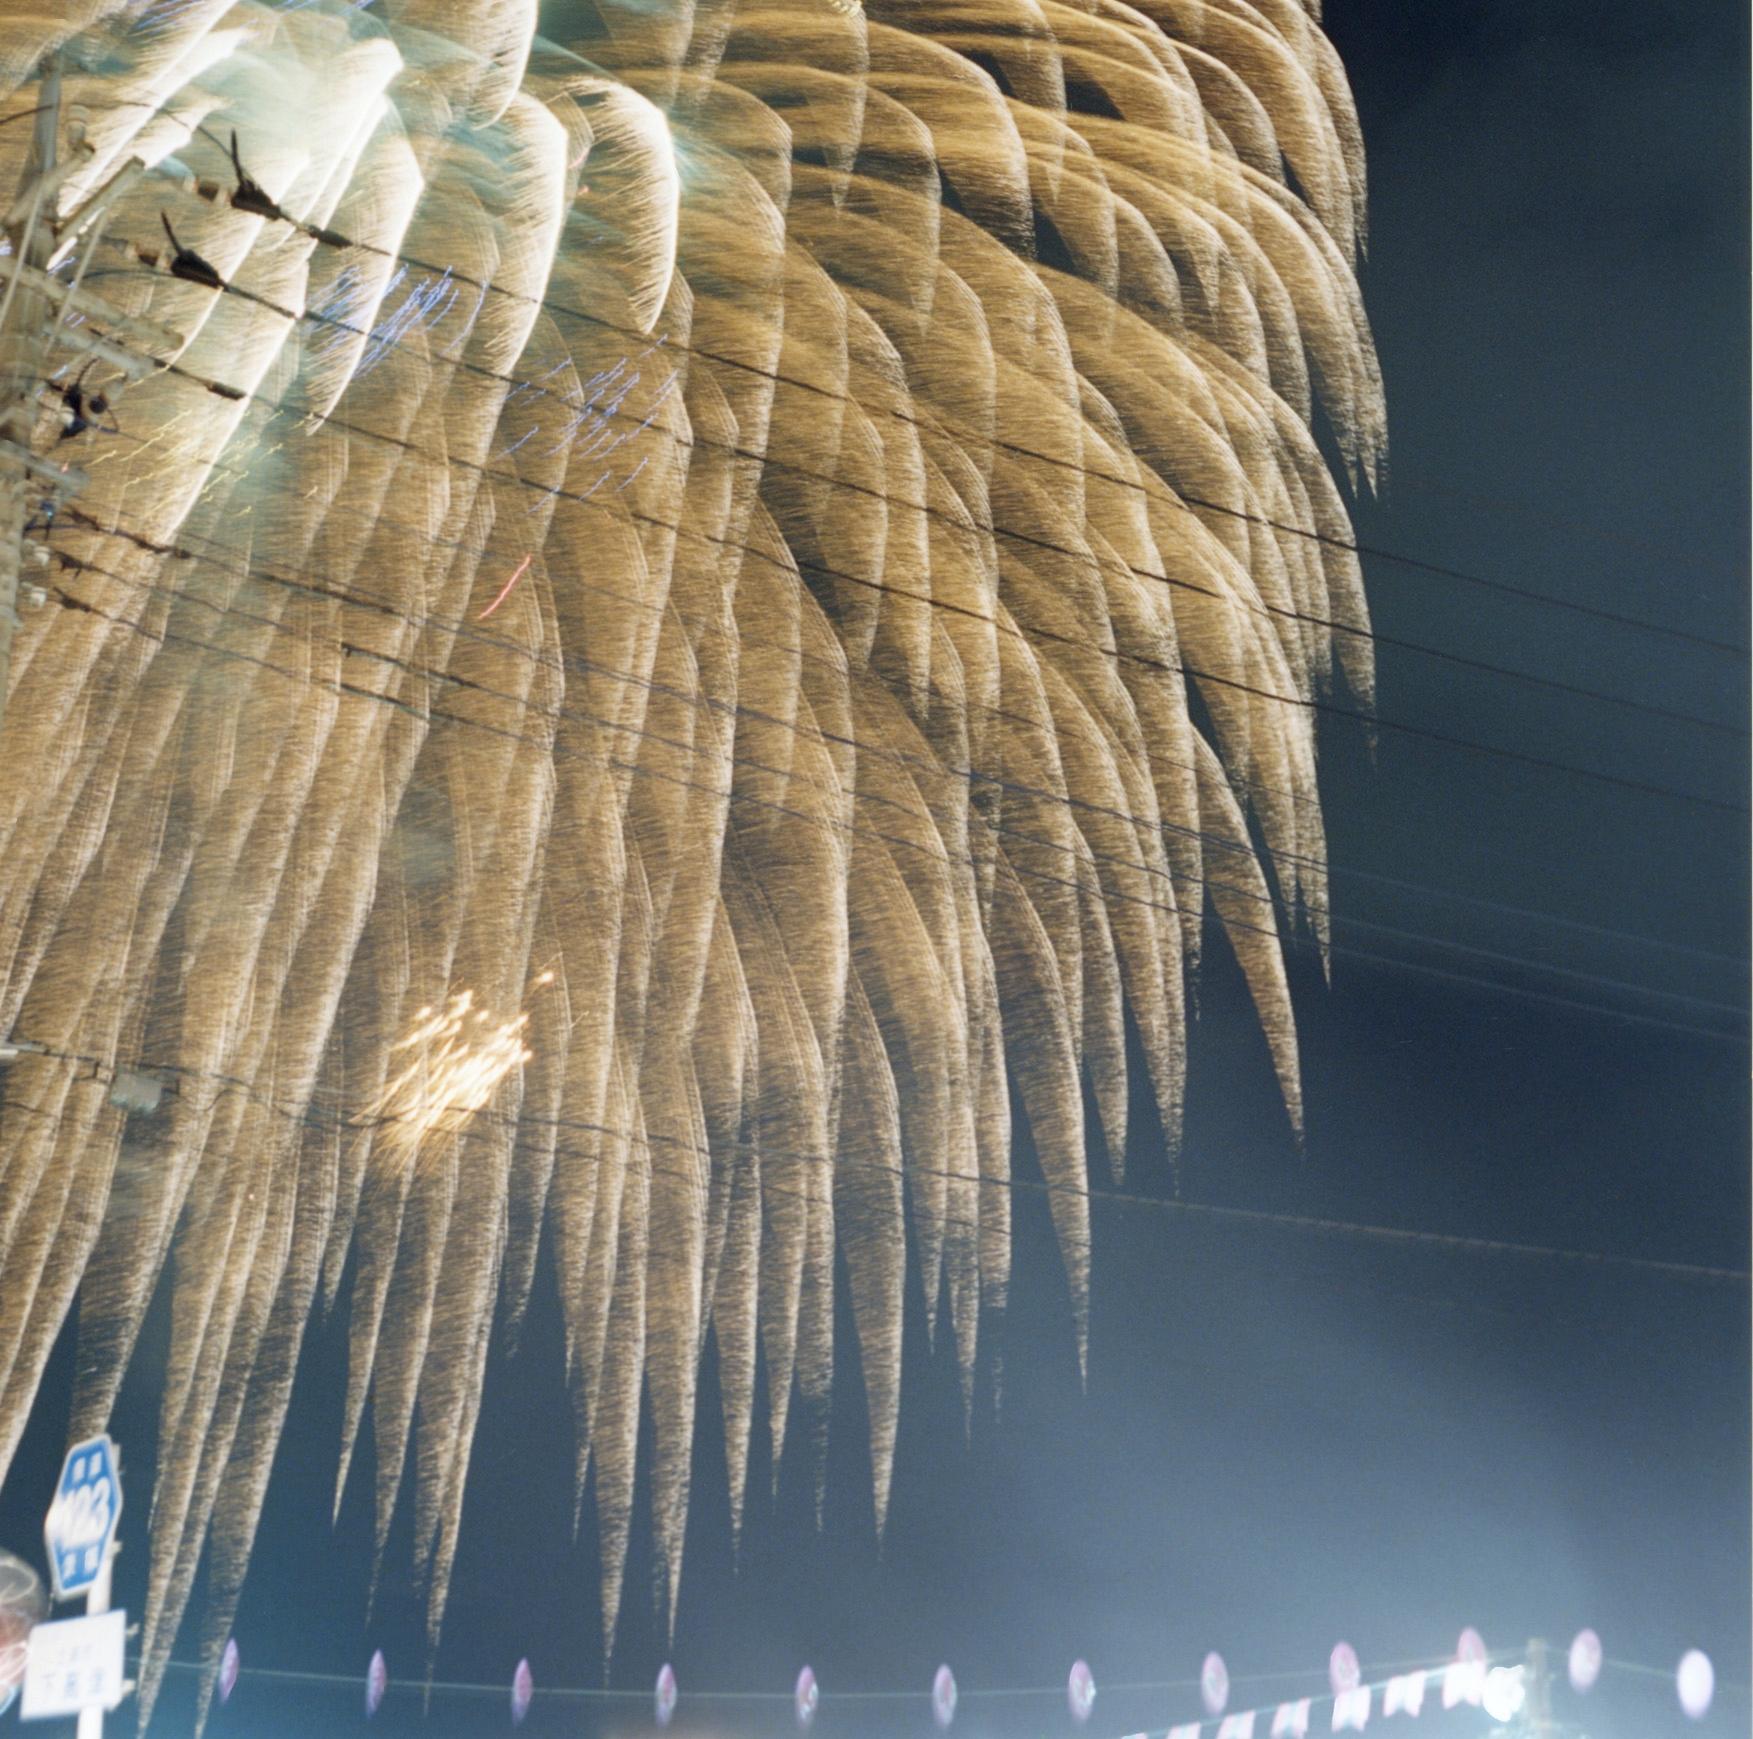 RINKO KAWAUCHI (*1972, Japan)
Untitled, from the series 'Hanabi'
2001
C–type print
Sheet 25.4 x 20.3 cm (10 x 8 in.)
Edition of 6; Ed. no. 6/6 
framed

Reminiscent of Japanese photography of the 1960s Rinko Kawauchi’s work is the search for the